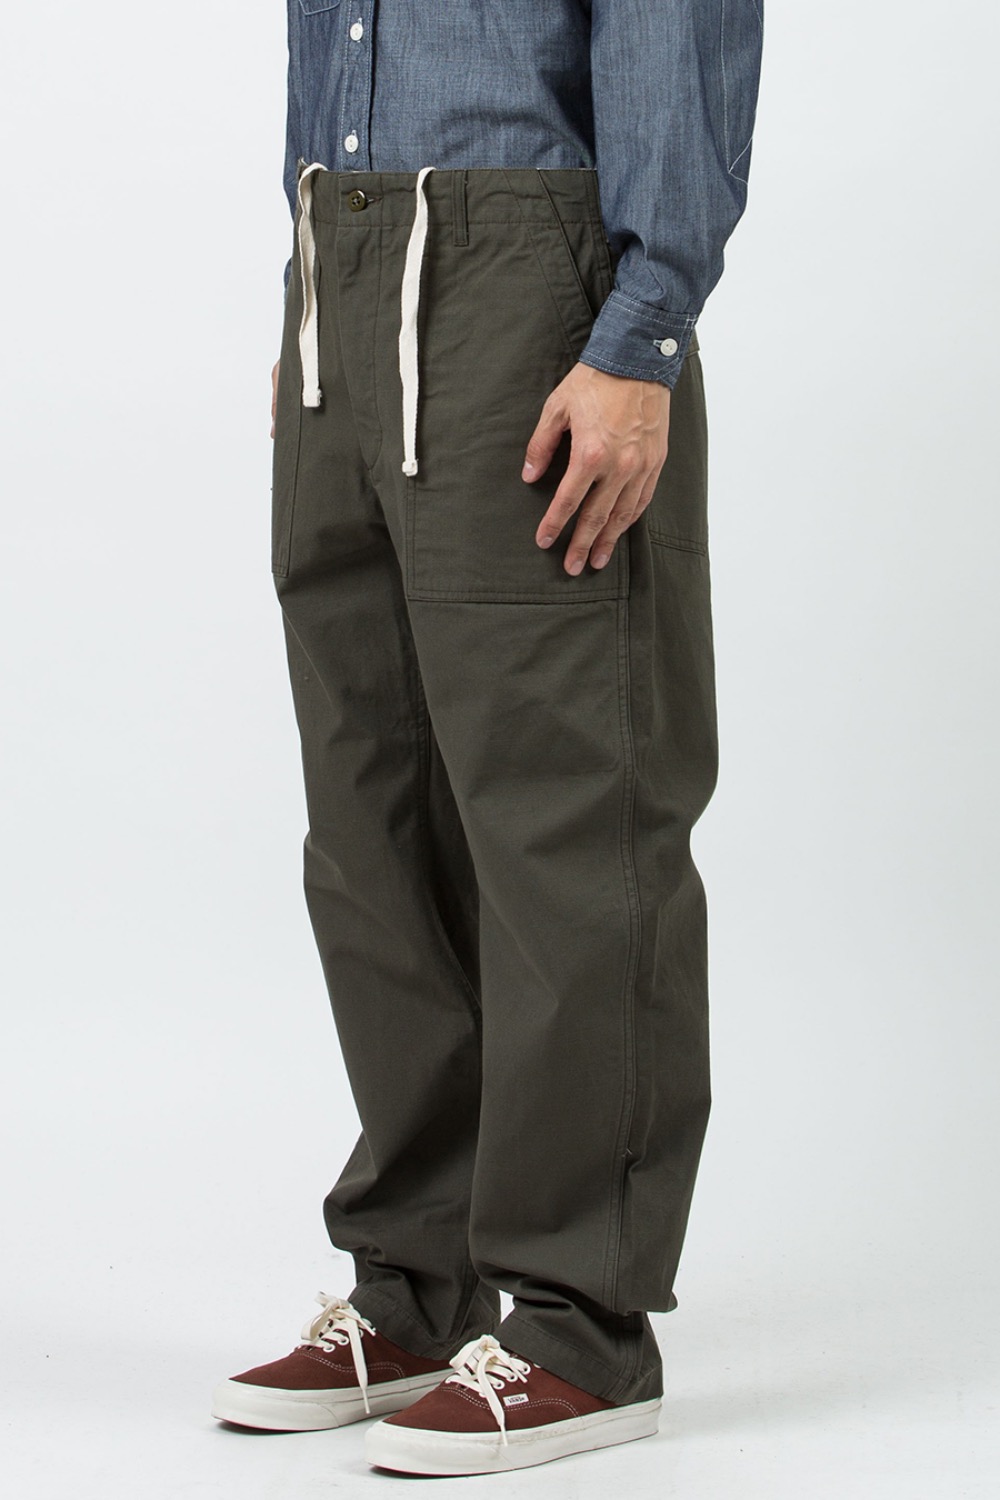 (23FW) FATIGUE PANT OLIVE HEAVYWEIGHT COTTON RIPSTOP